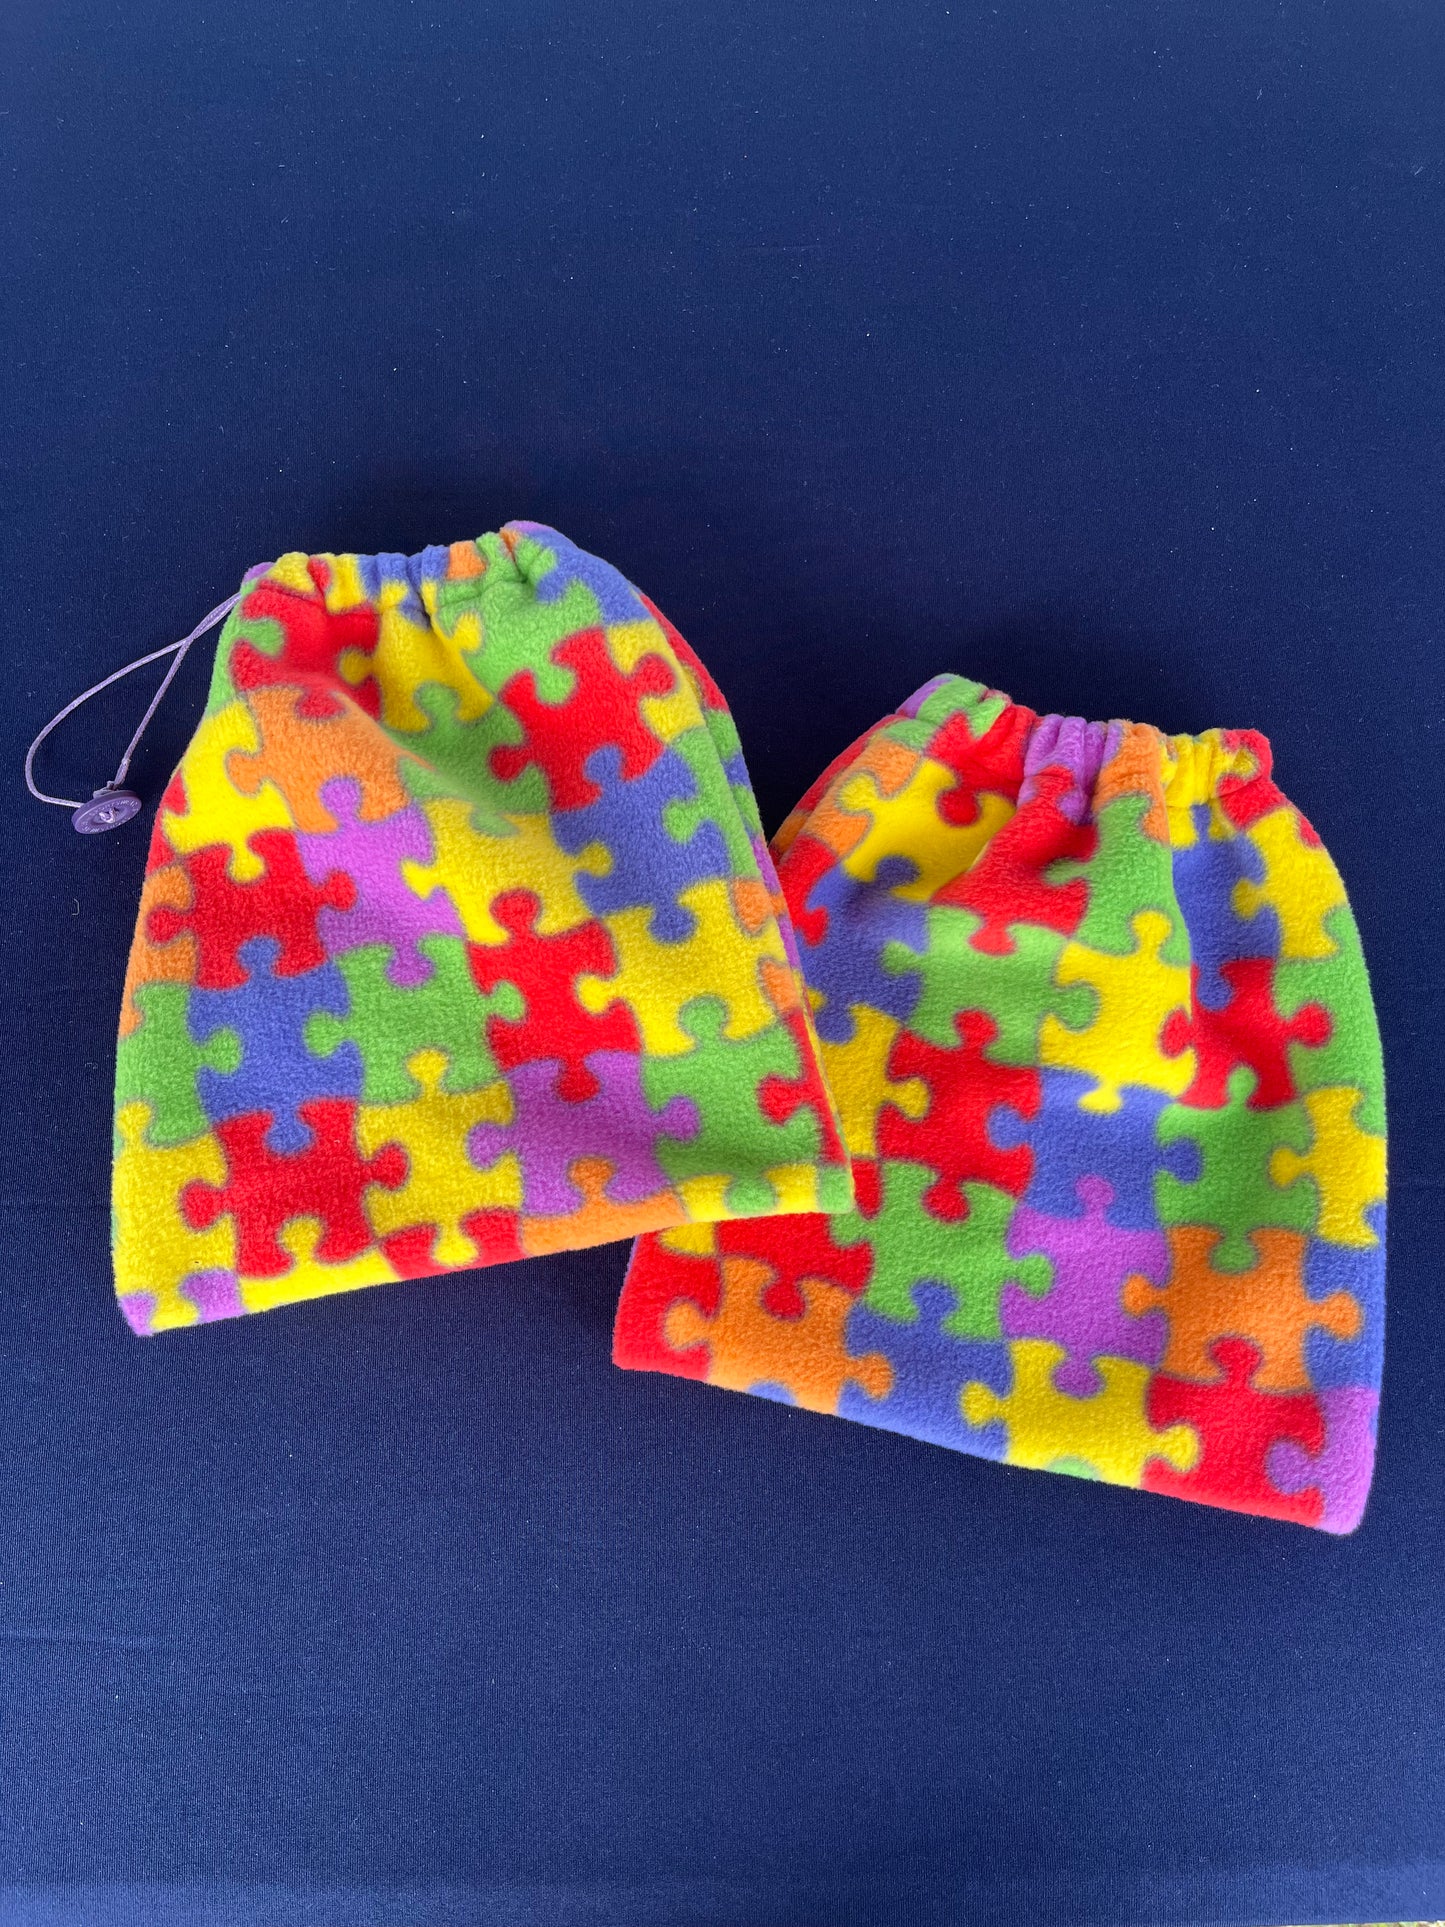 stirrup covers with different coloured jigsaw pieces on them